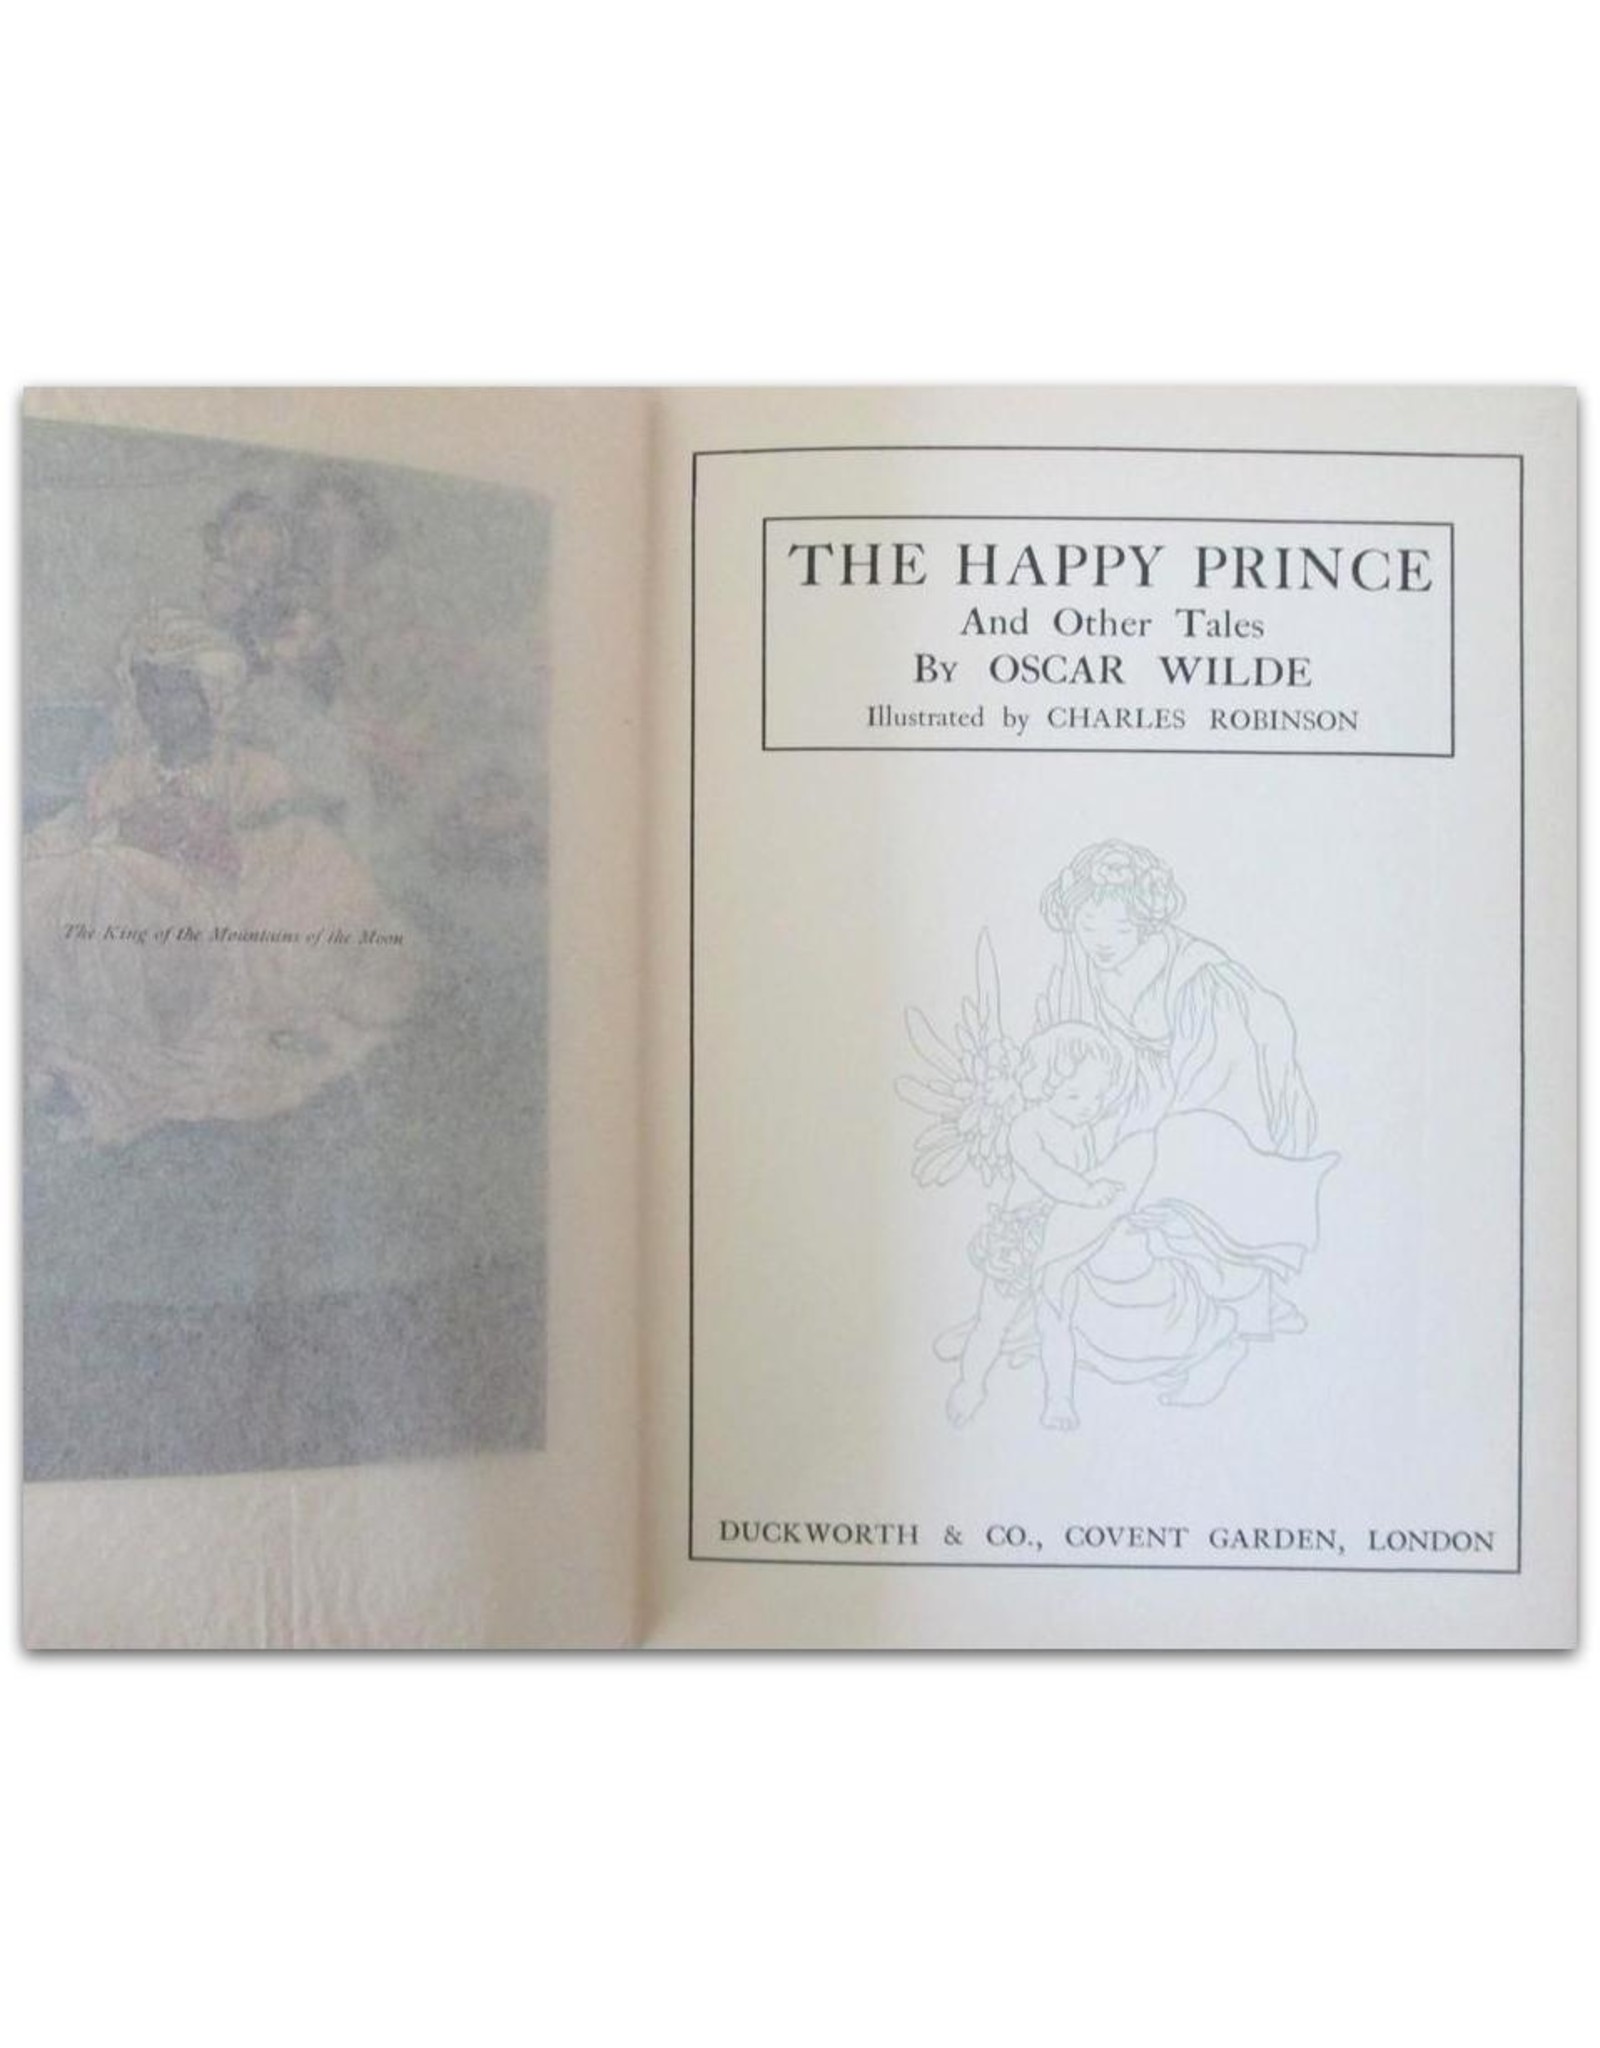 Oscar Wilde - The Happy Prince And Other Tales: Illustrated by Charles Robinson